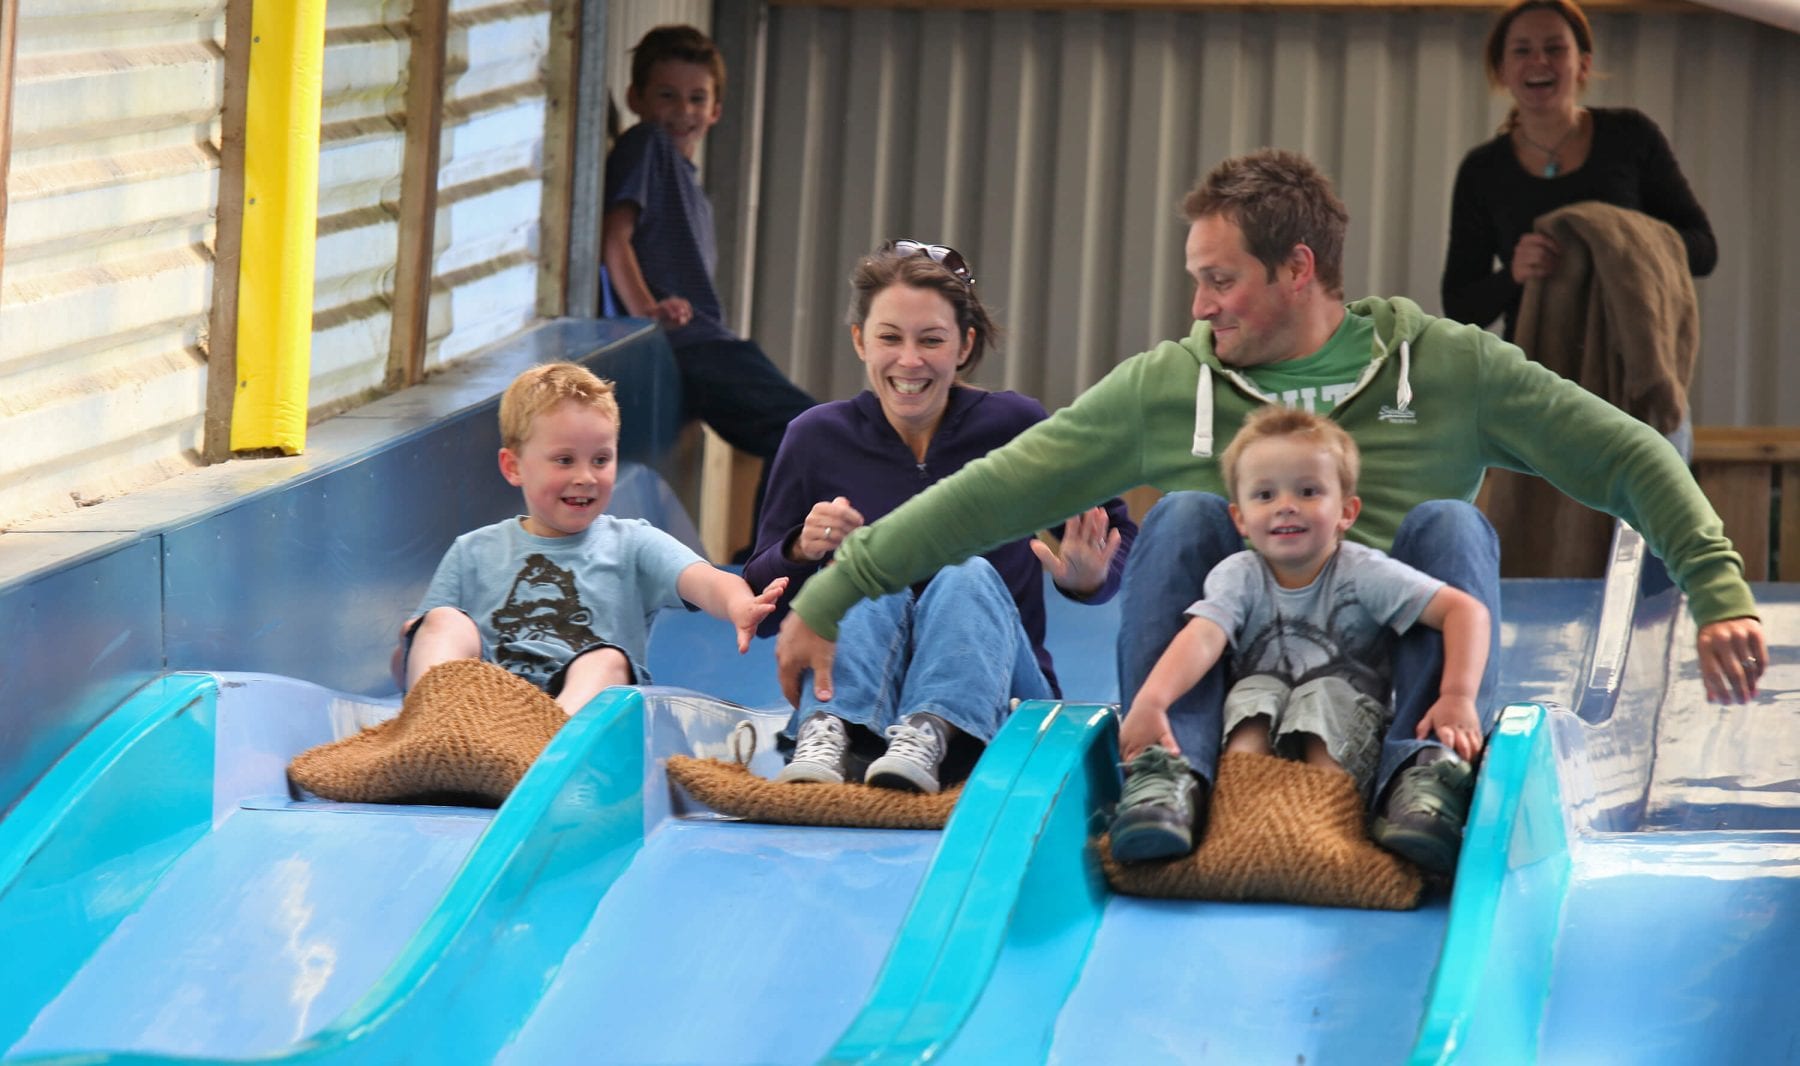 Big Blue Slide at World of Country Life Exmouth Devon